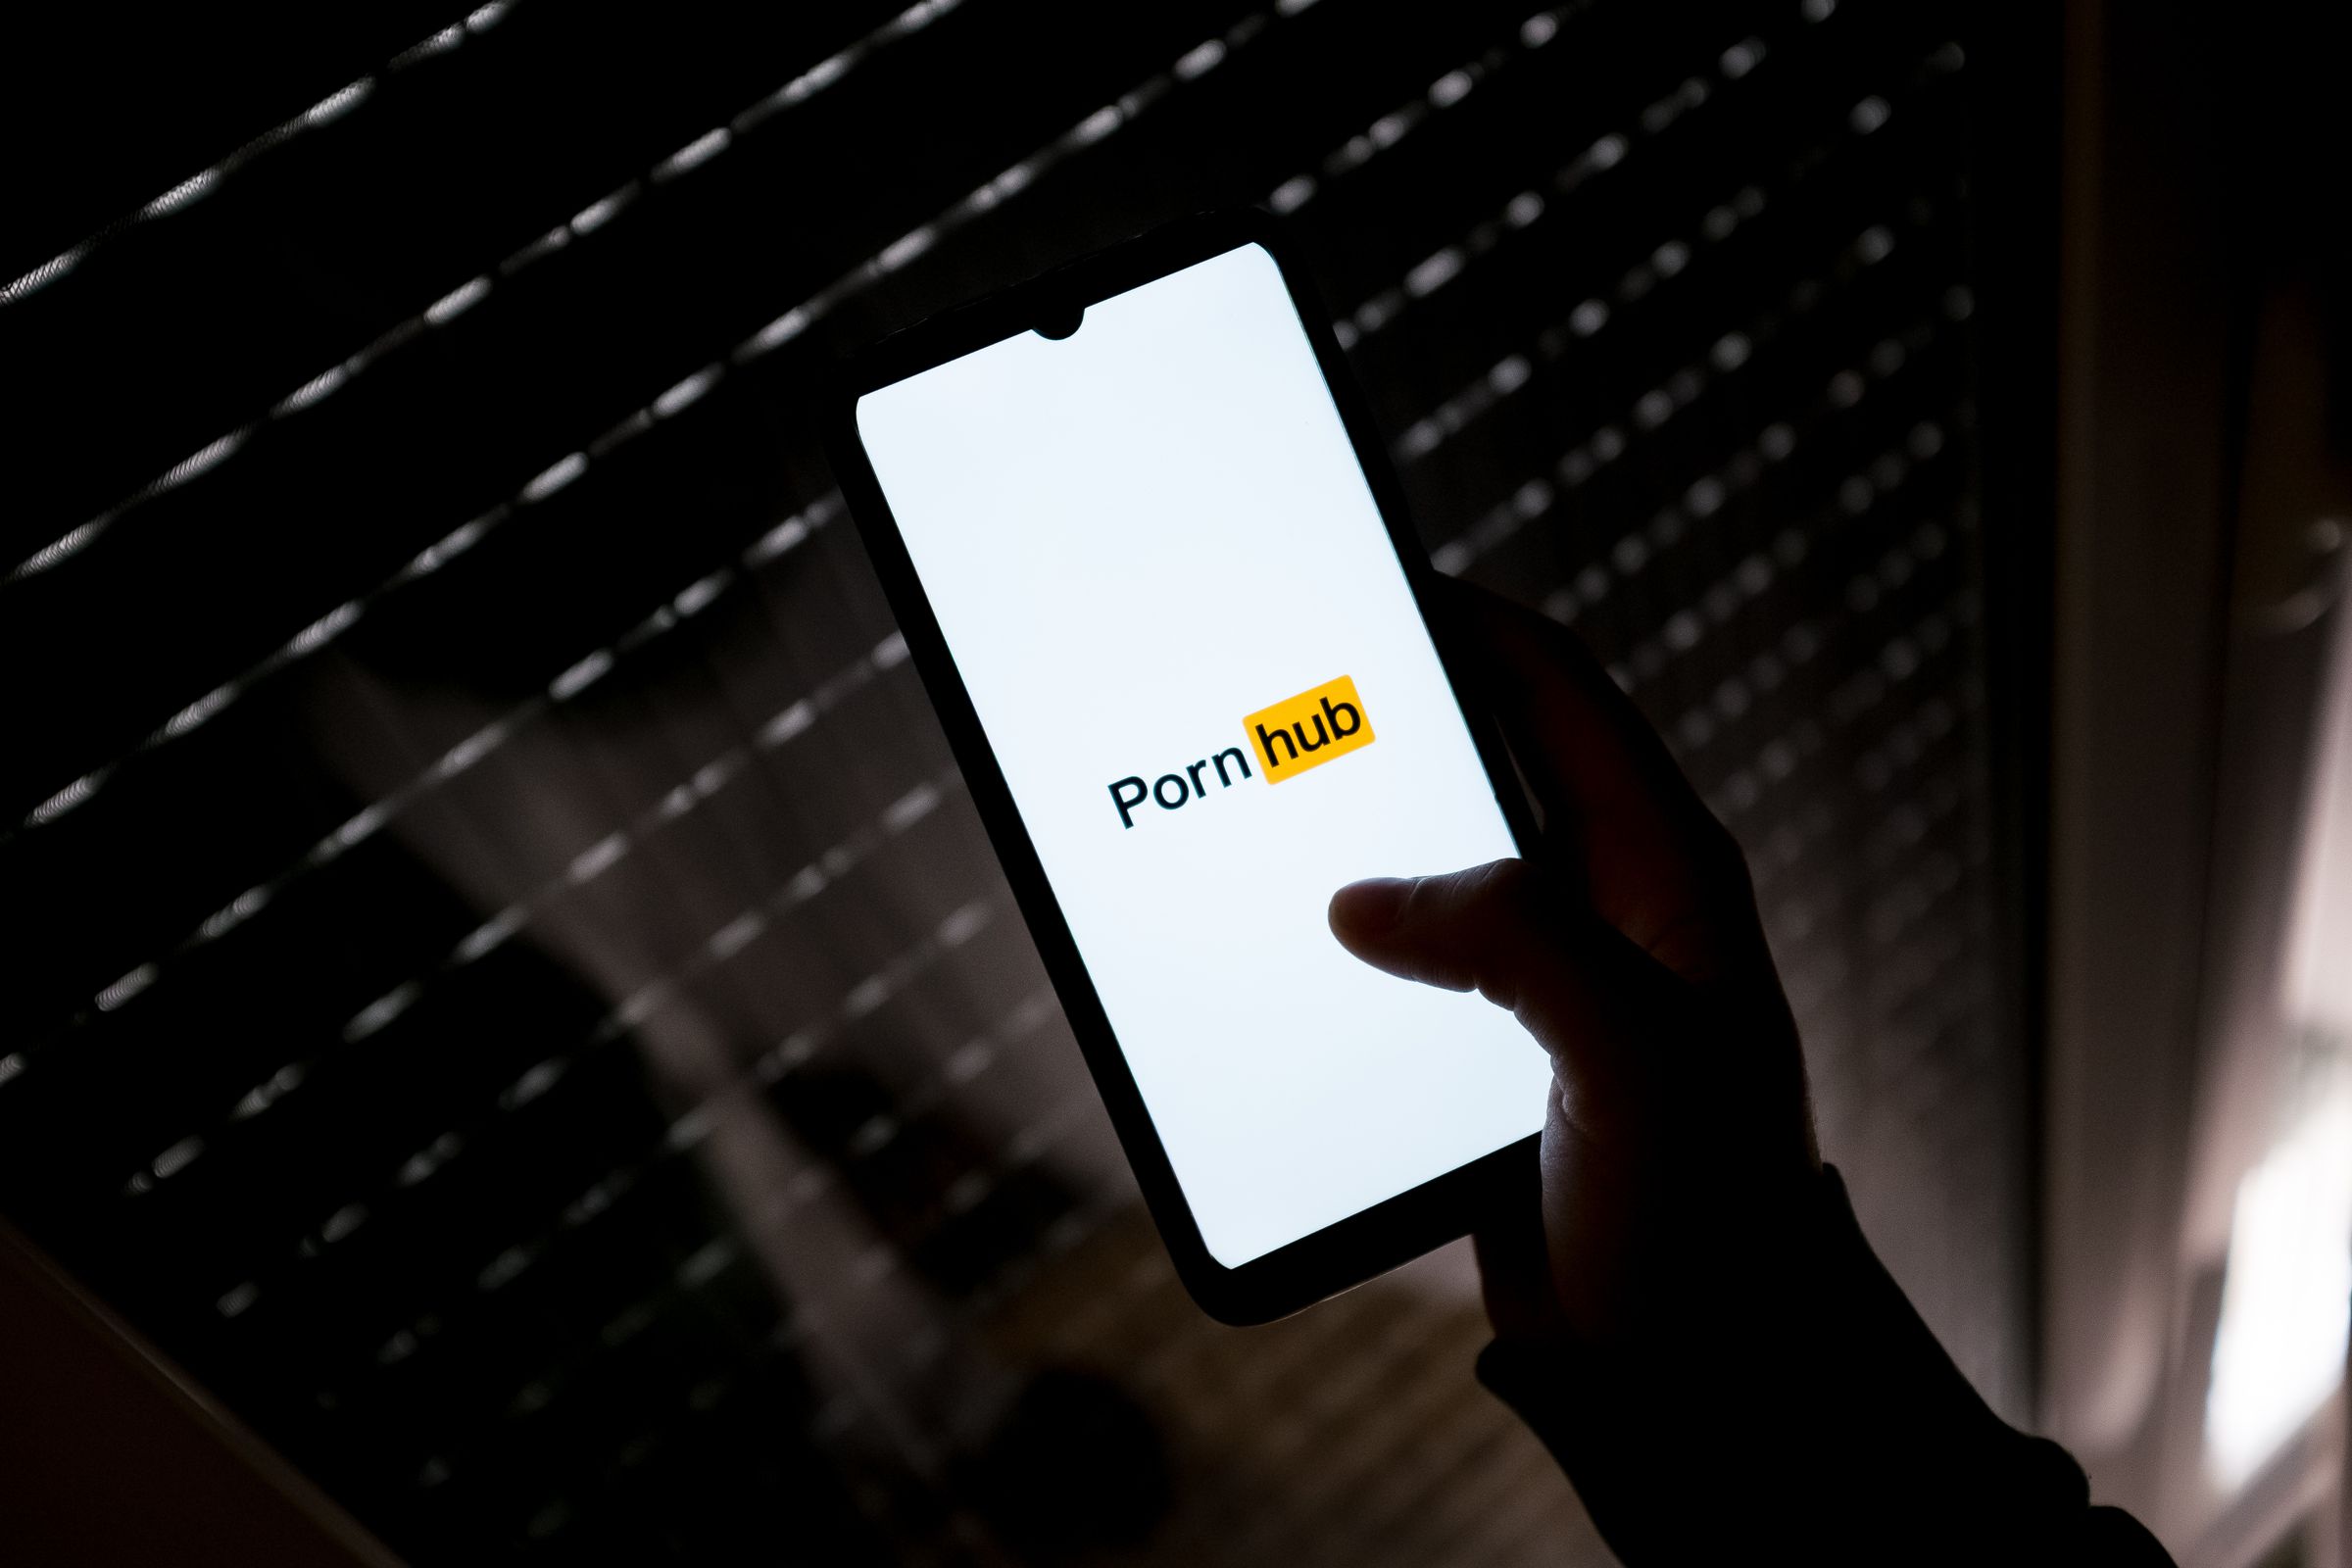 An image showing the Pornhub logo on a phone